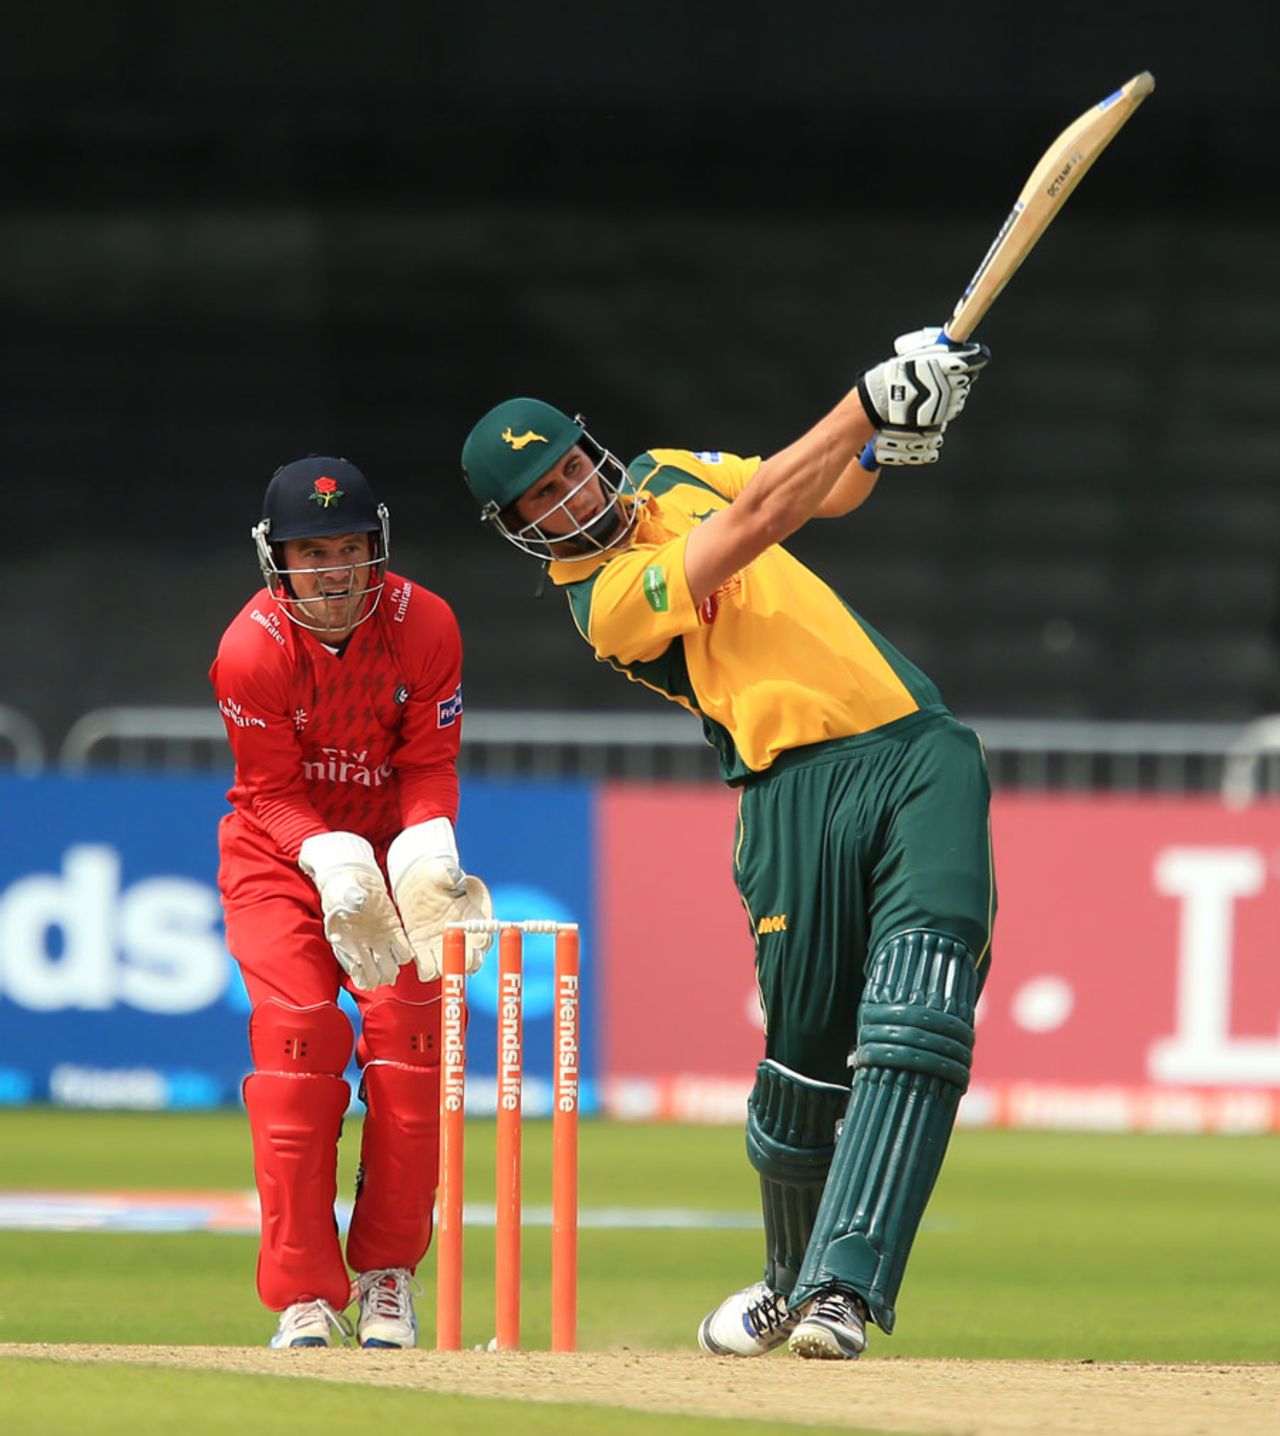 Alex Hales swings the ball to leg during his 82 from 52 balls, Nottinghamshire v Lancashire, FLt20 North Group, Trent Bridge, July 28, 2013